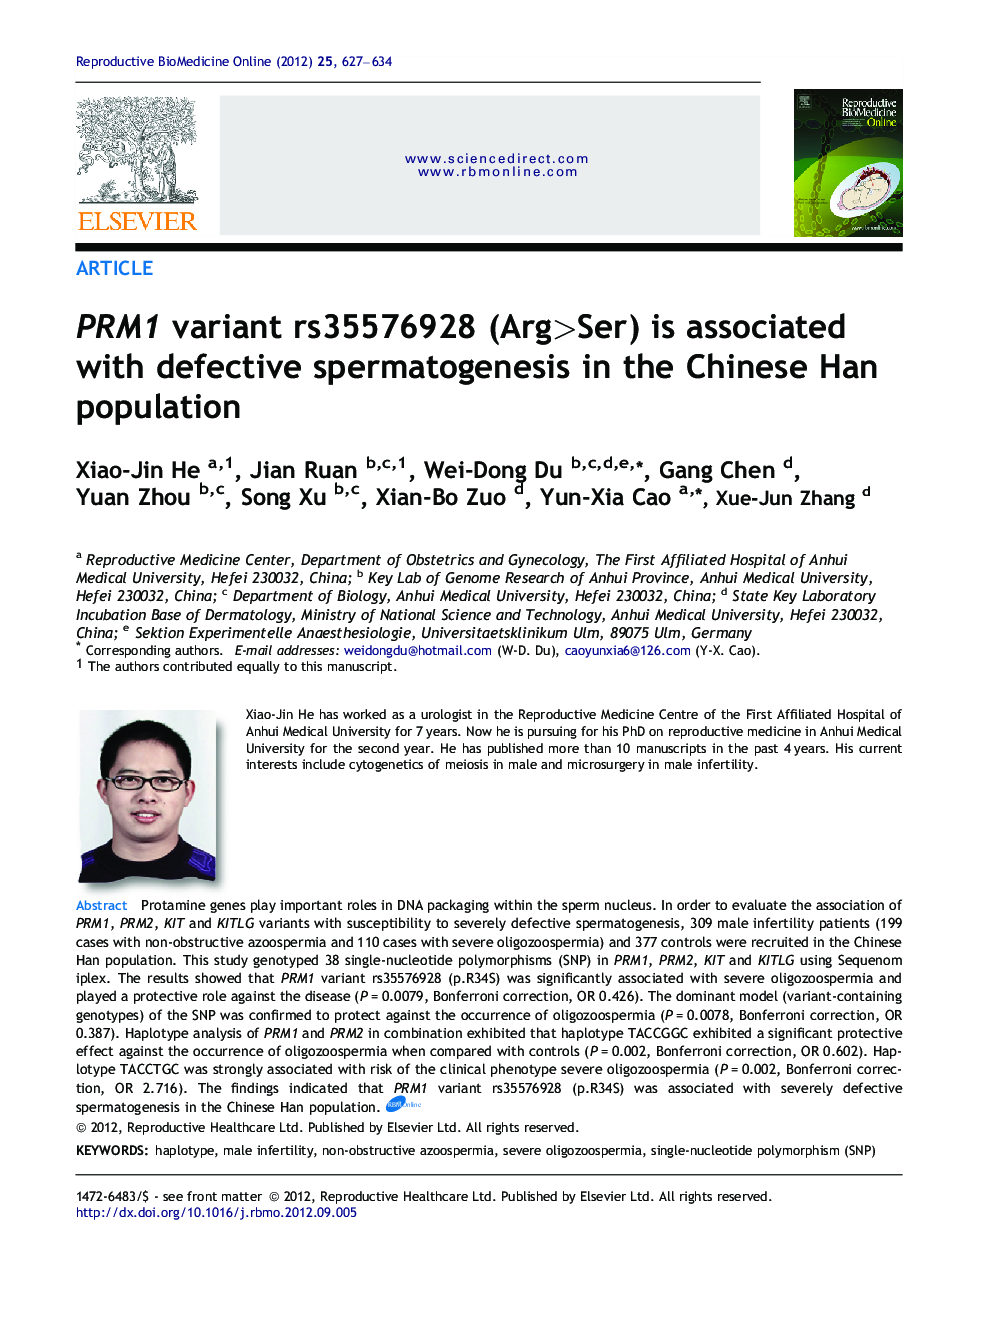 PRM1 variant rs35576928 (Arg>Ser) is associated with defective spermatogenesis in the Chinese Han population 